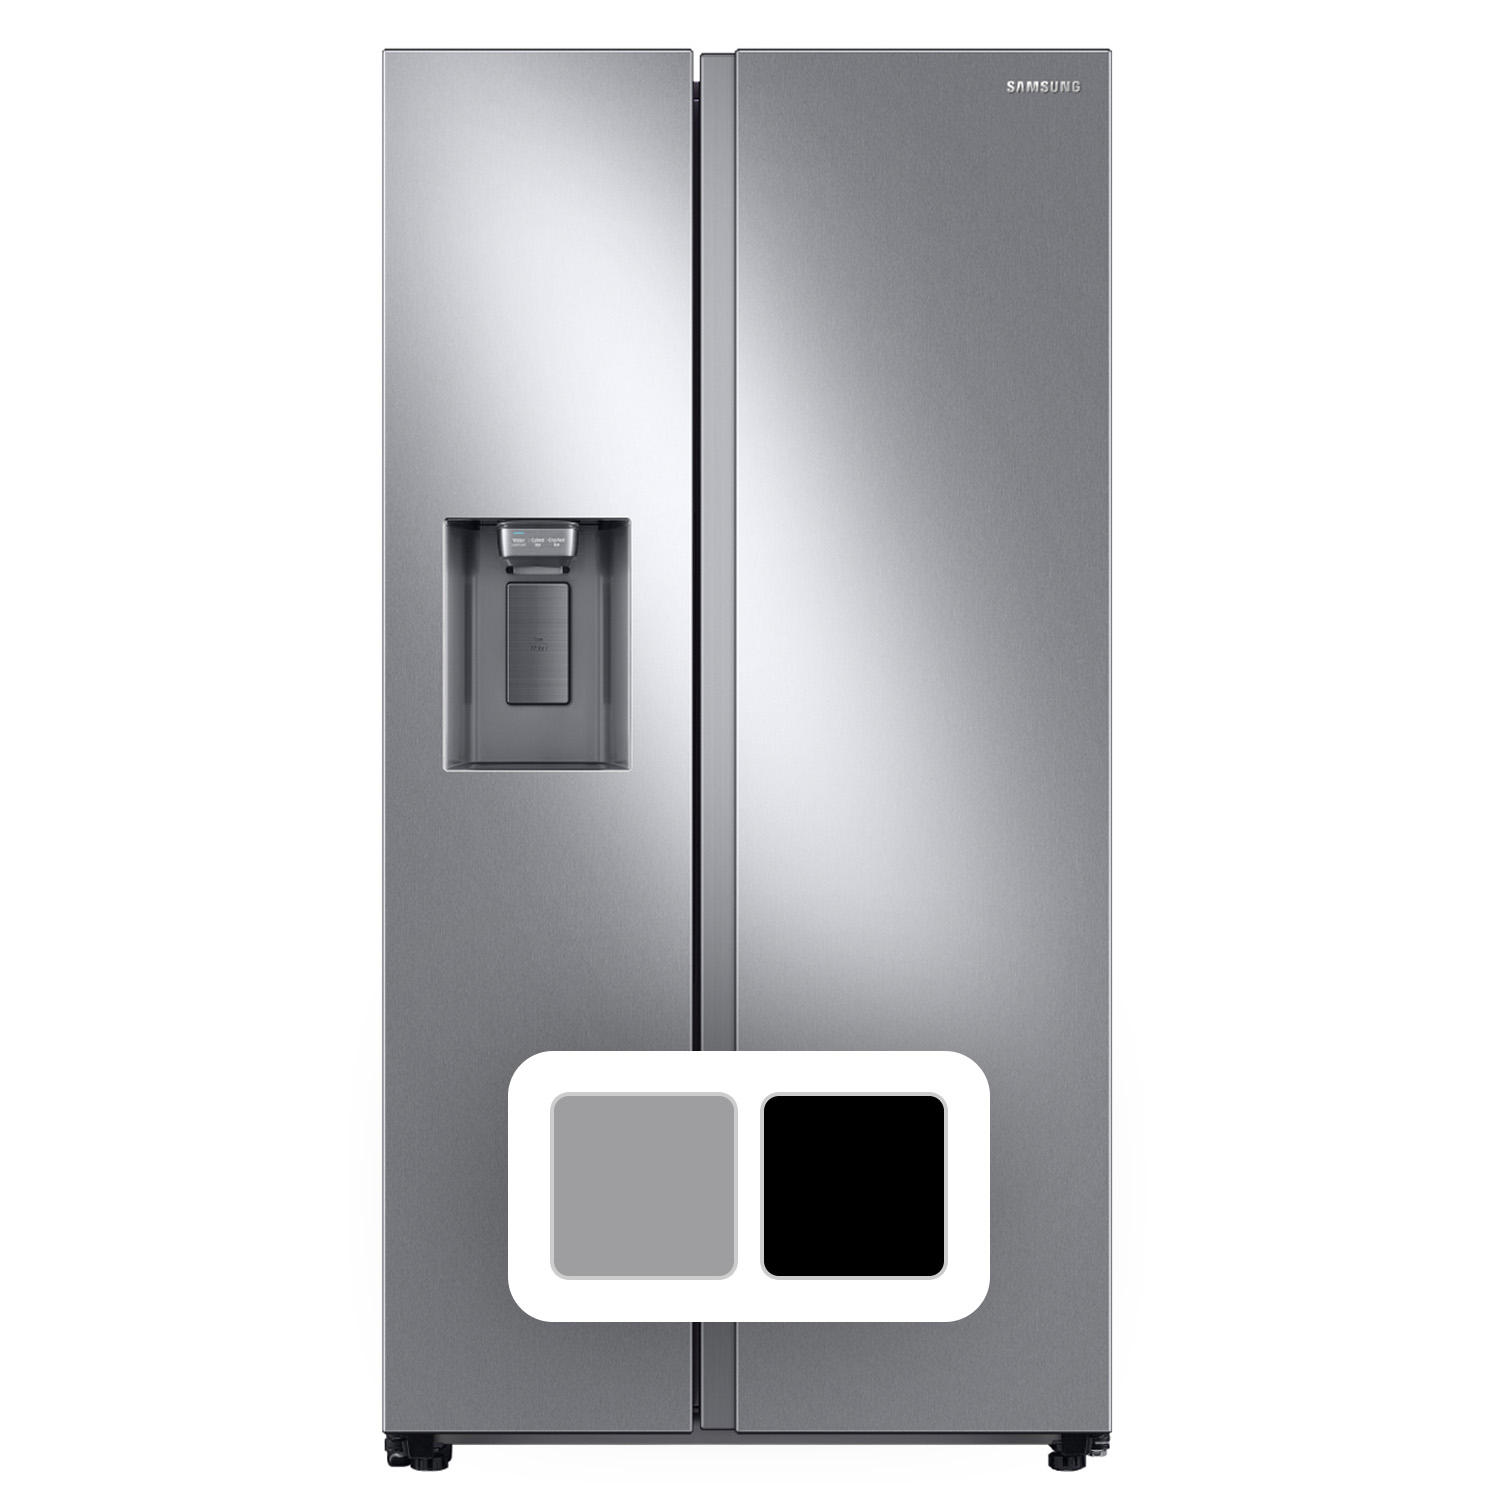 Samsung 22 cu. ft. Counter Depth Side By Side Refrigerator - Stainless Steel